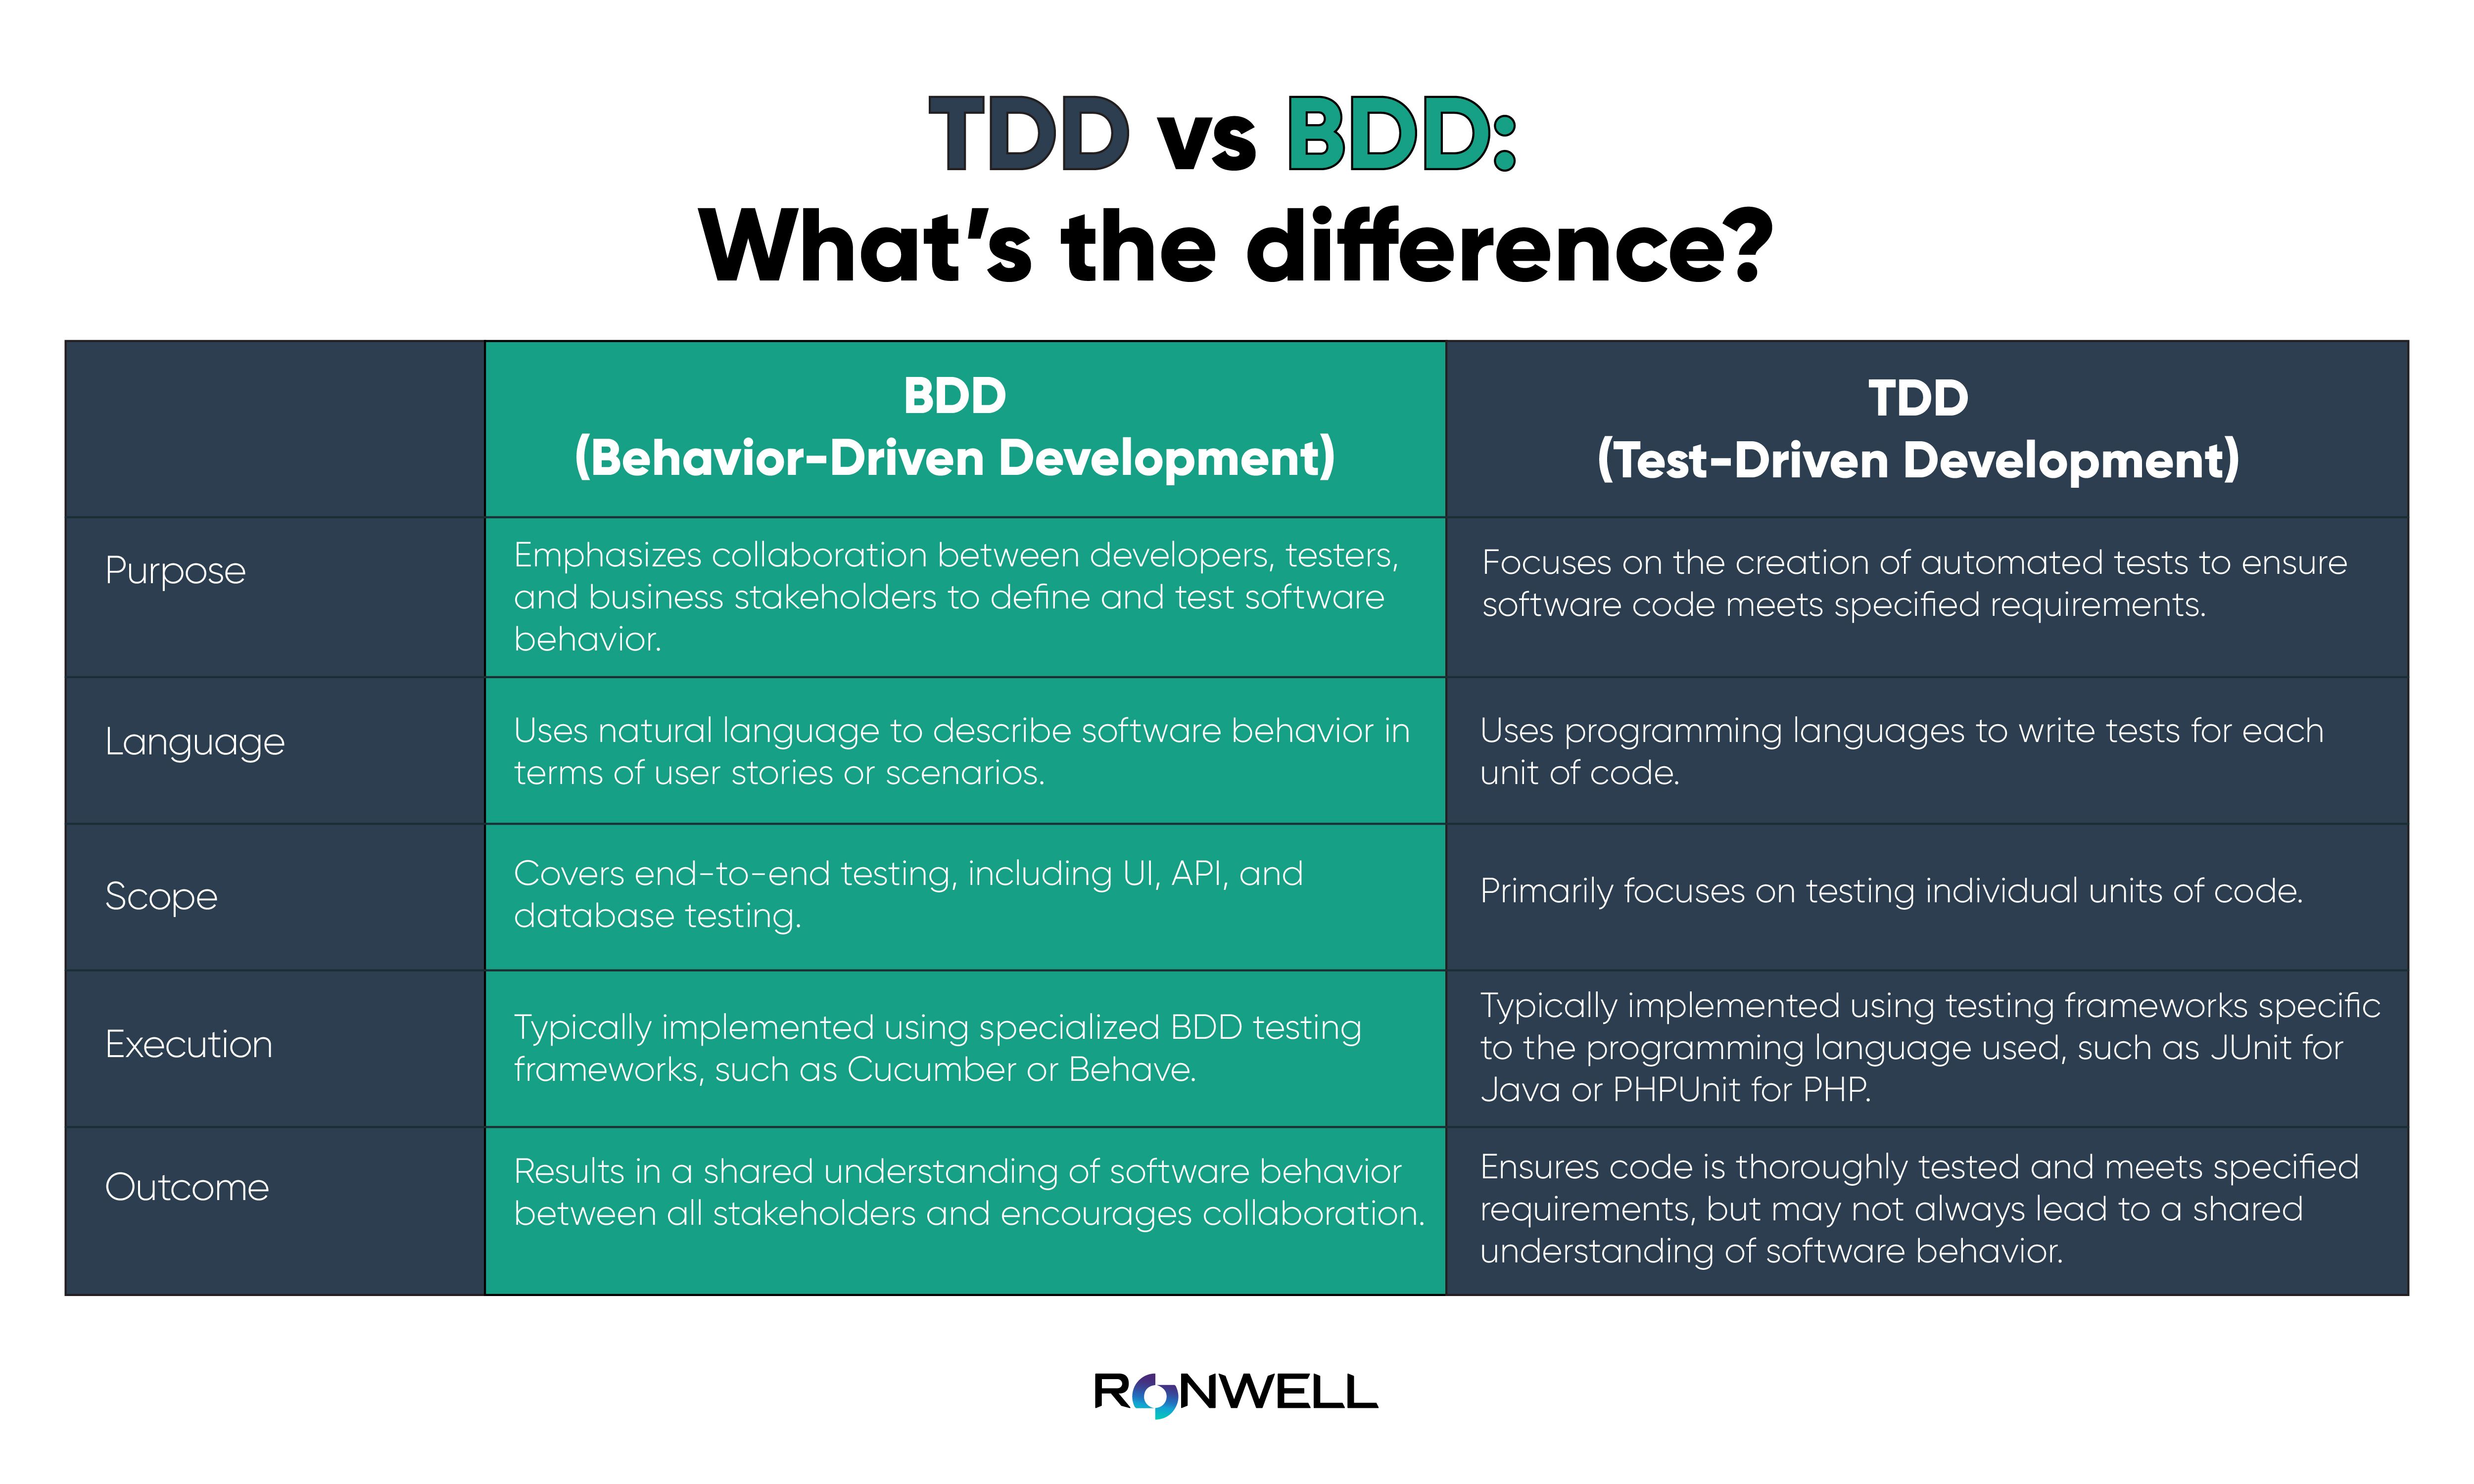 tdd-vs-bdd-what-is-difference.jpg